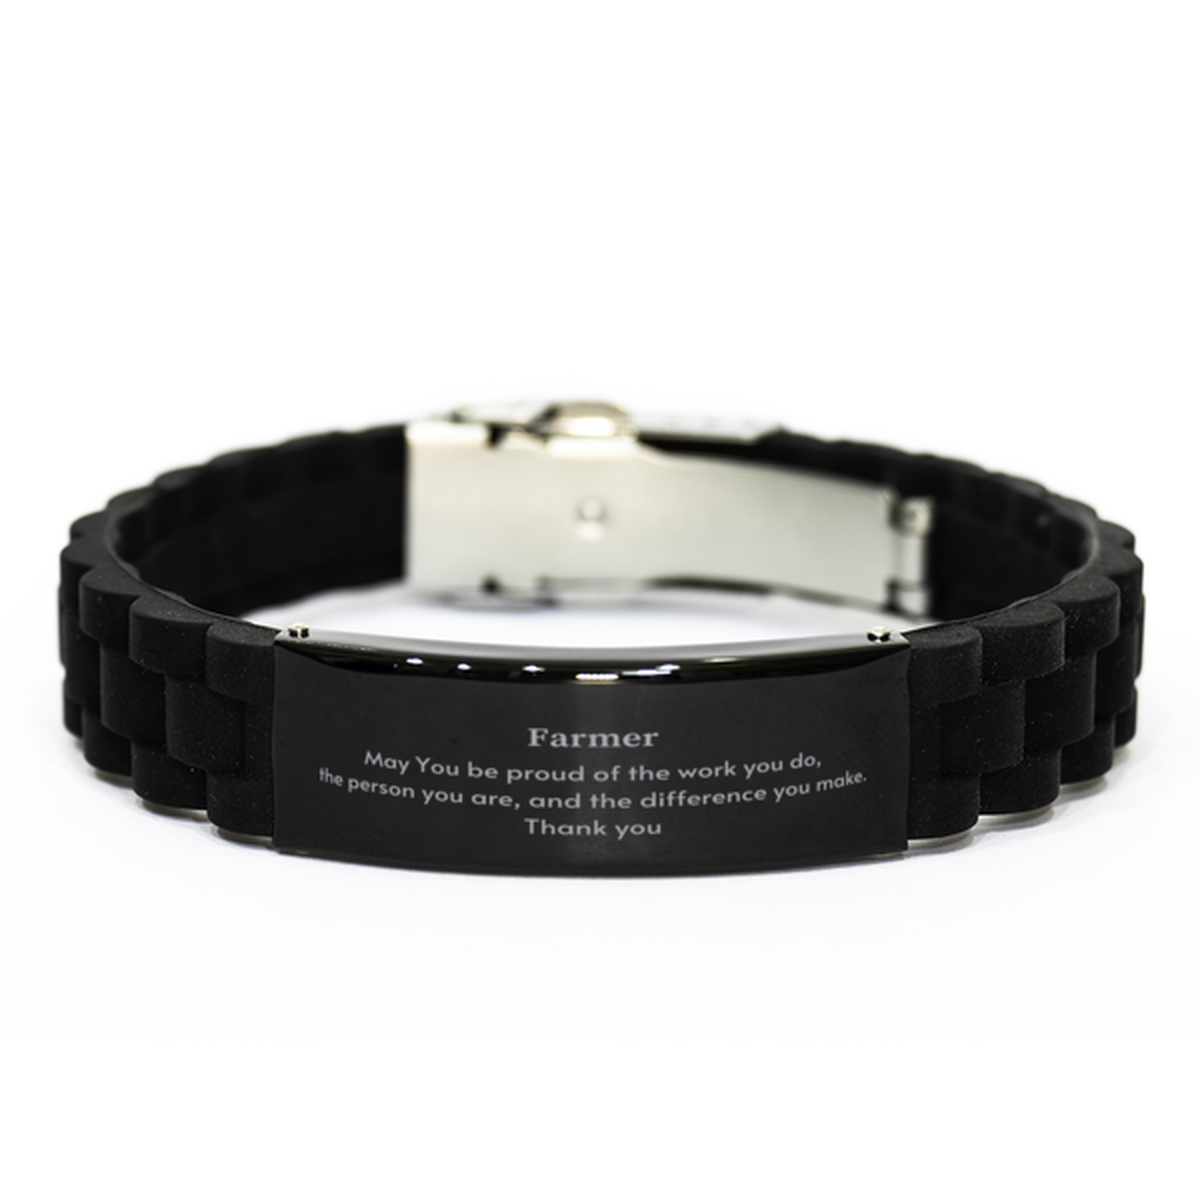 Heartwarming Black Glidelock Clasp Bracelet Retirement Coworkers Gifts for Farmer, Farmer May You be proud of the work you do, the person you are Gifts for Boss Men Women Friends